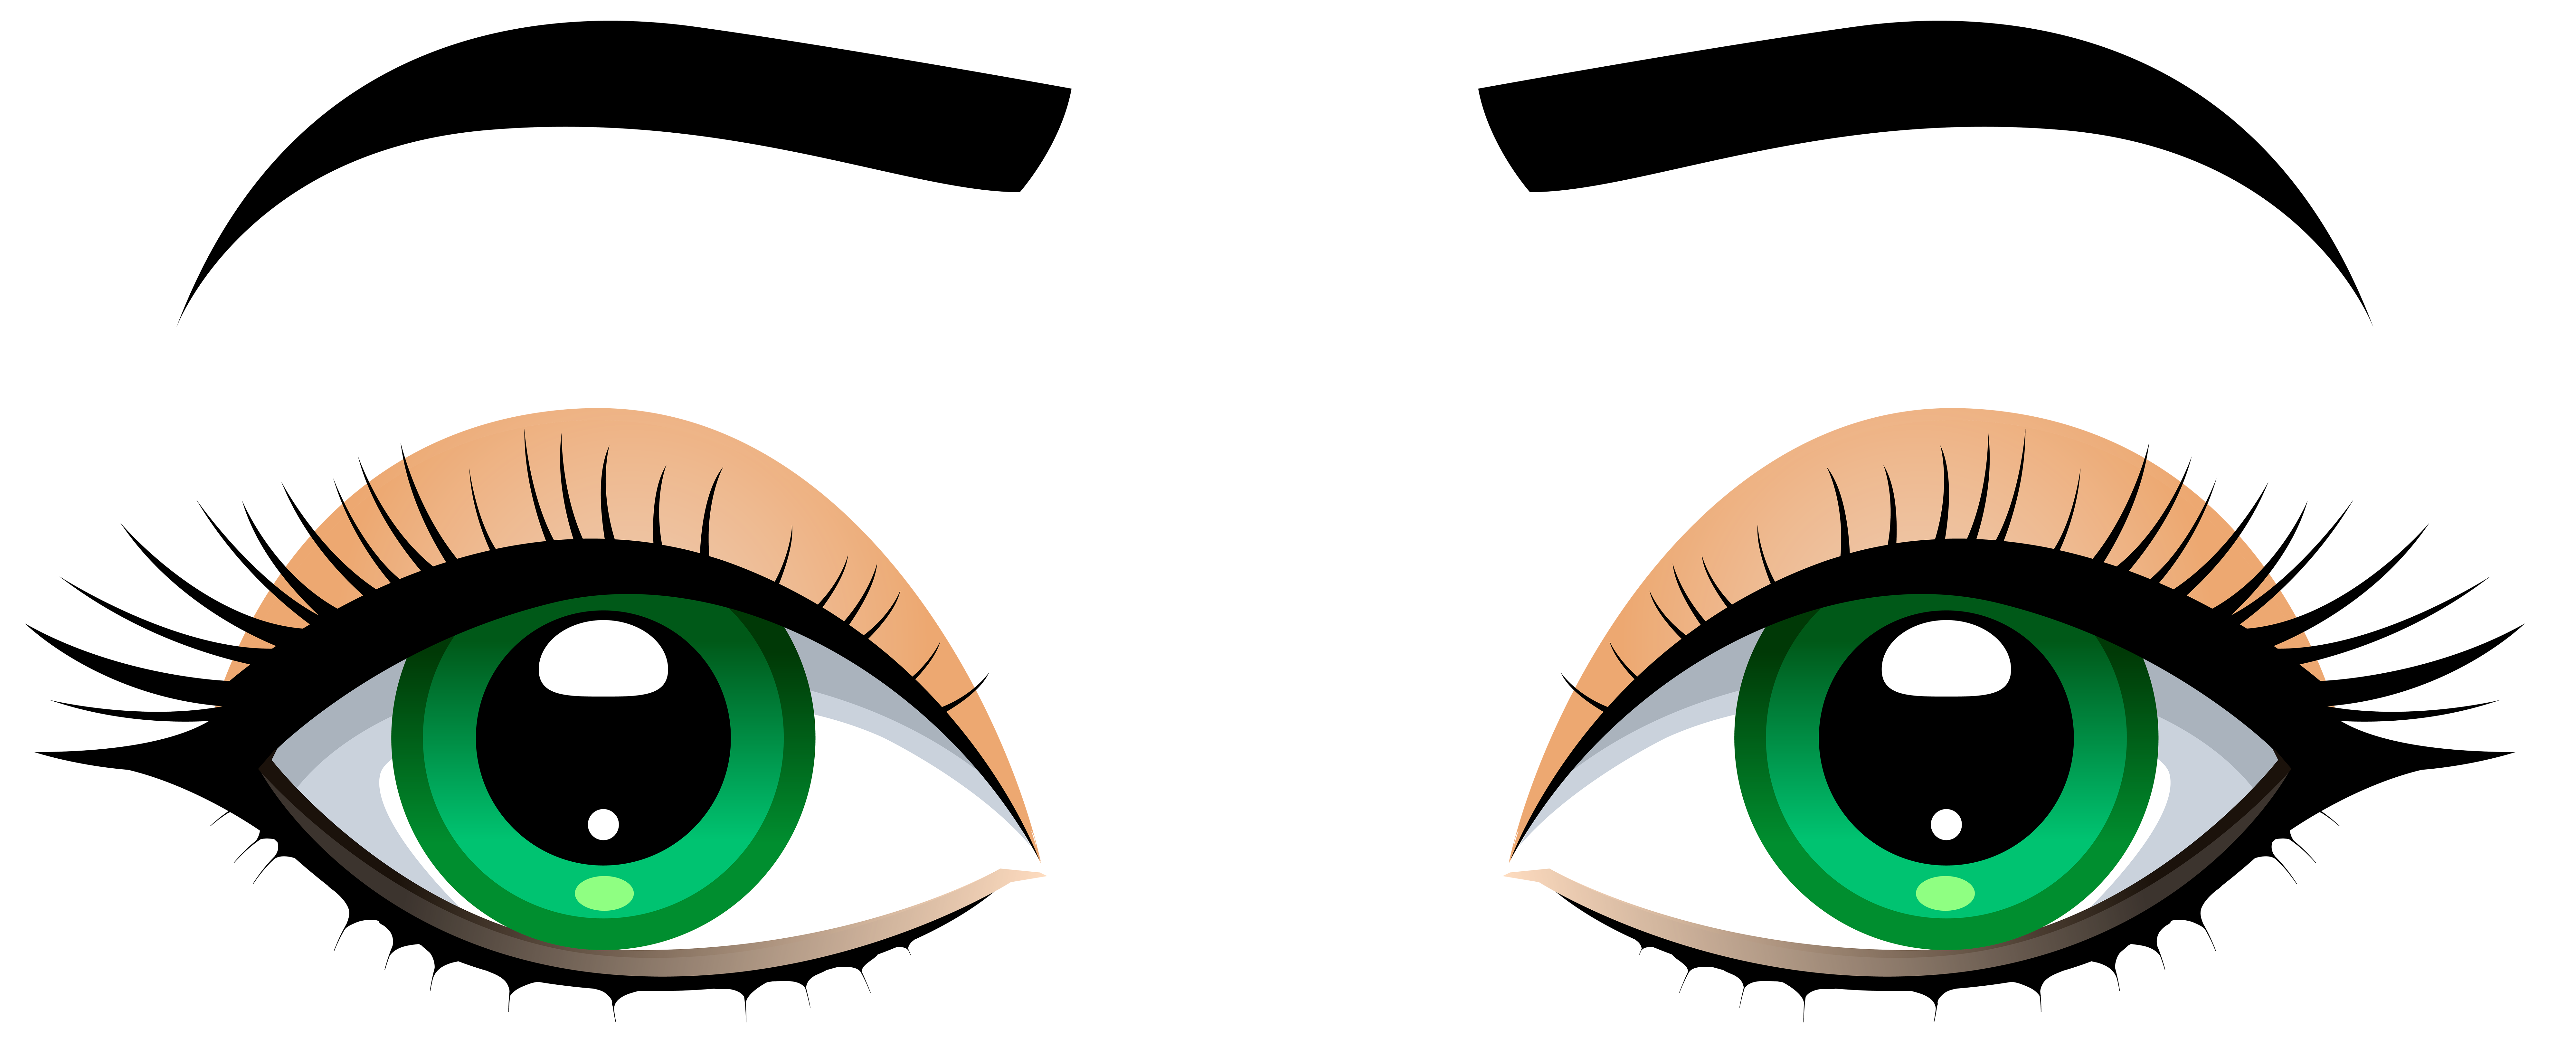 Female with eyebrows png. Eyes clipart